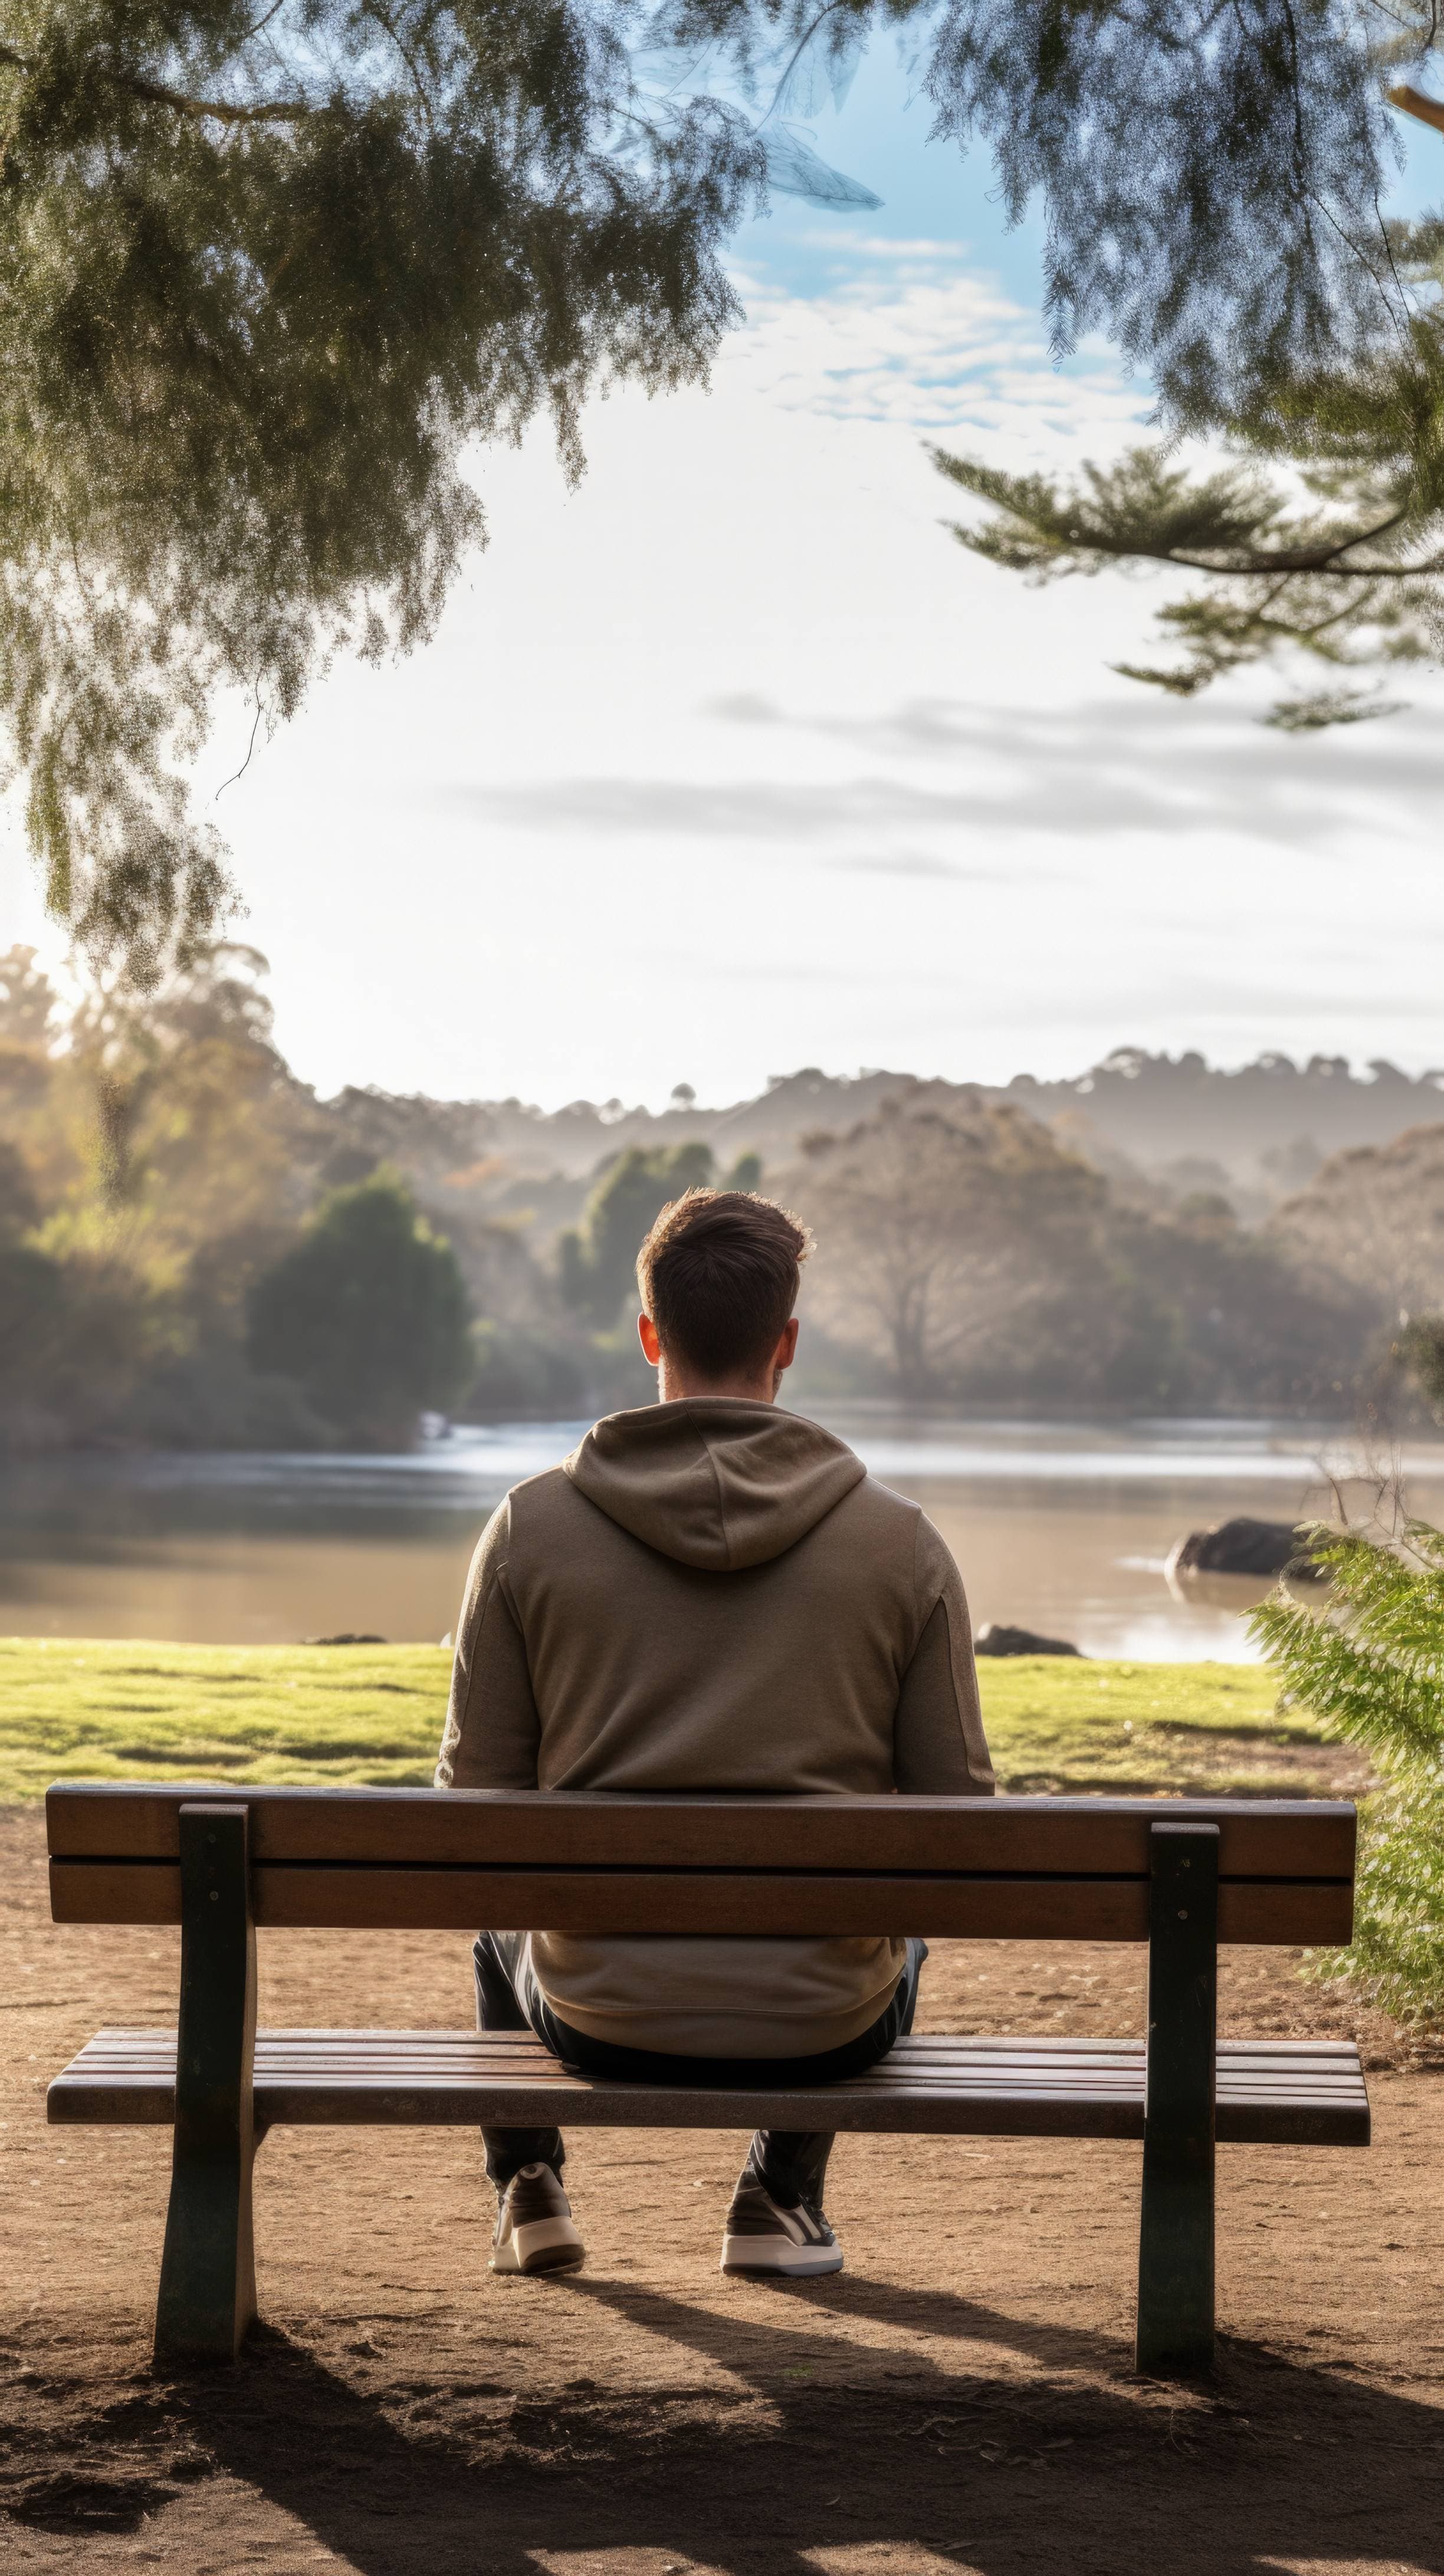 A person sitting alone in a peaceful and serene environment.